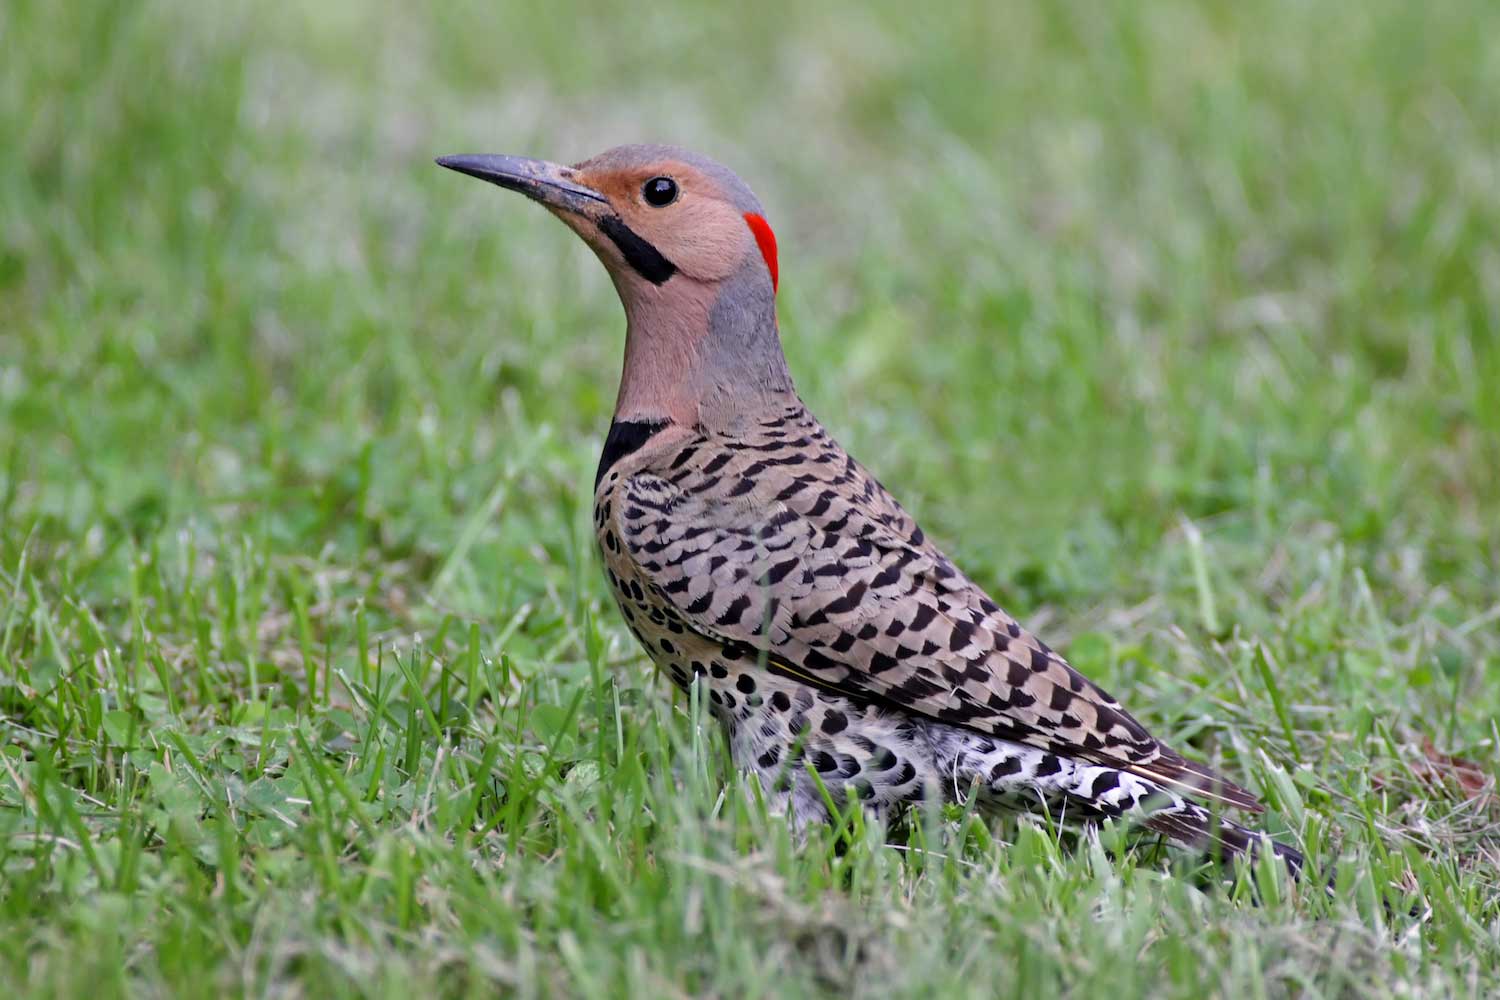 A northern flicker standing in the grass.